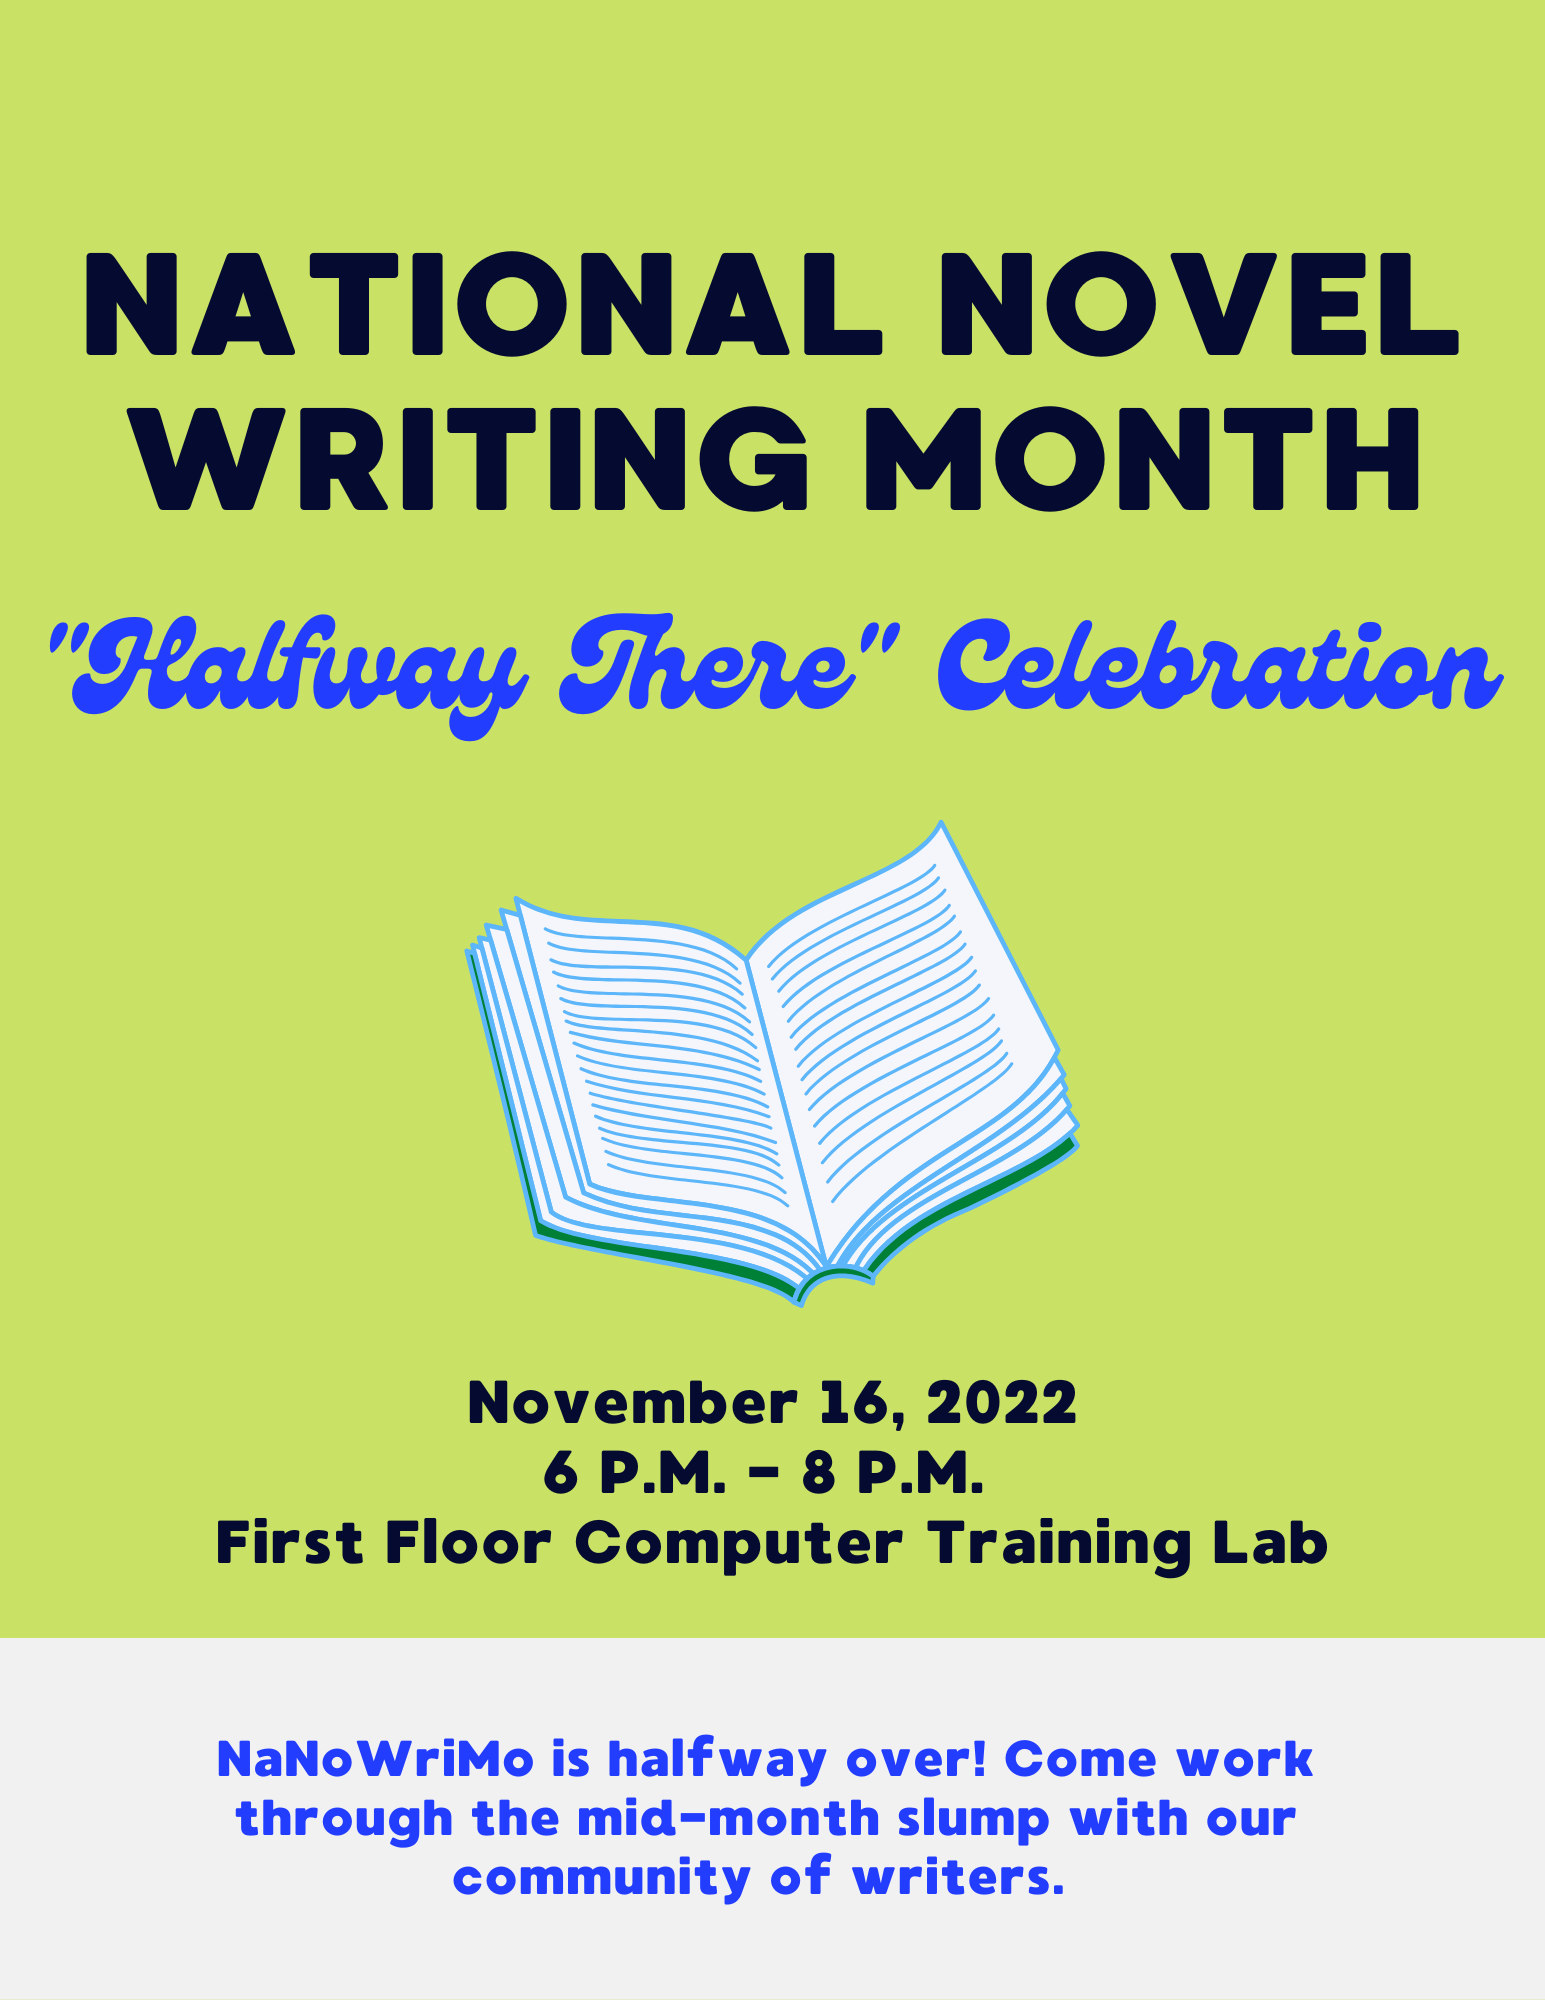 National Novel Writing Month Halfway There Celebration: November 16th, 2022 from 6:00 p.m. - 8:00 p.m. 